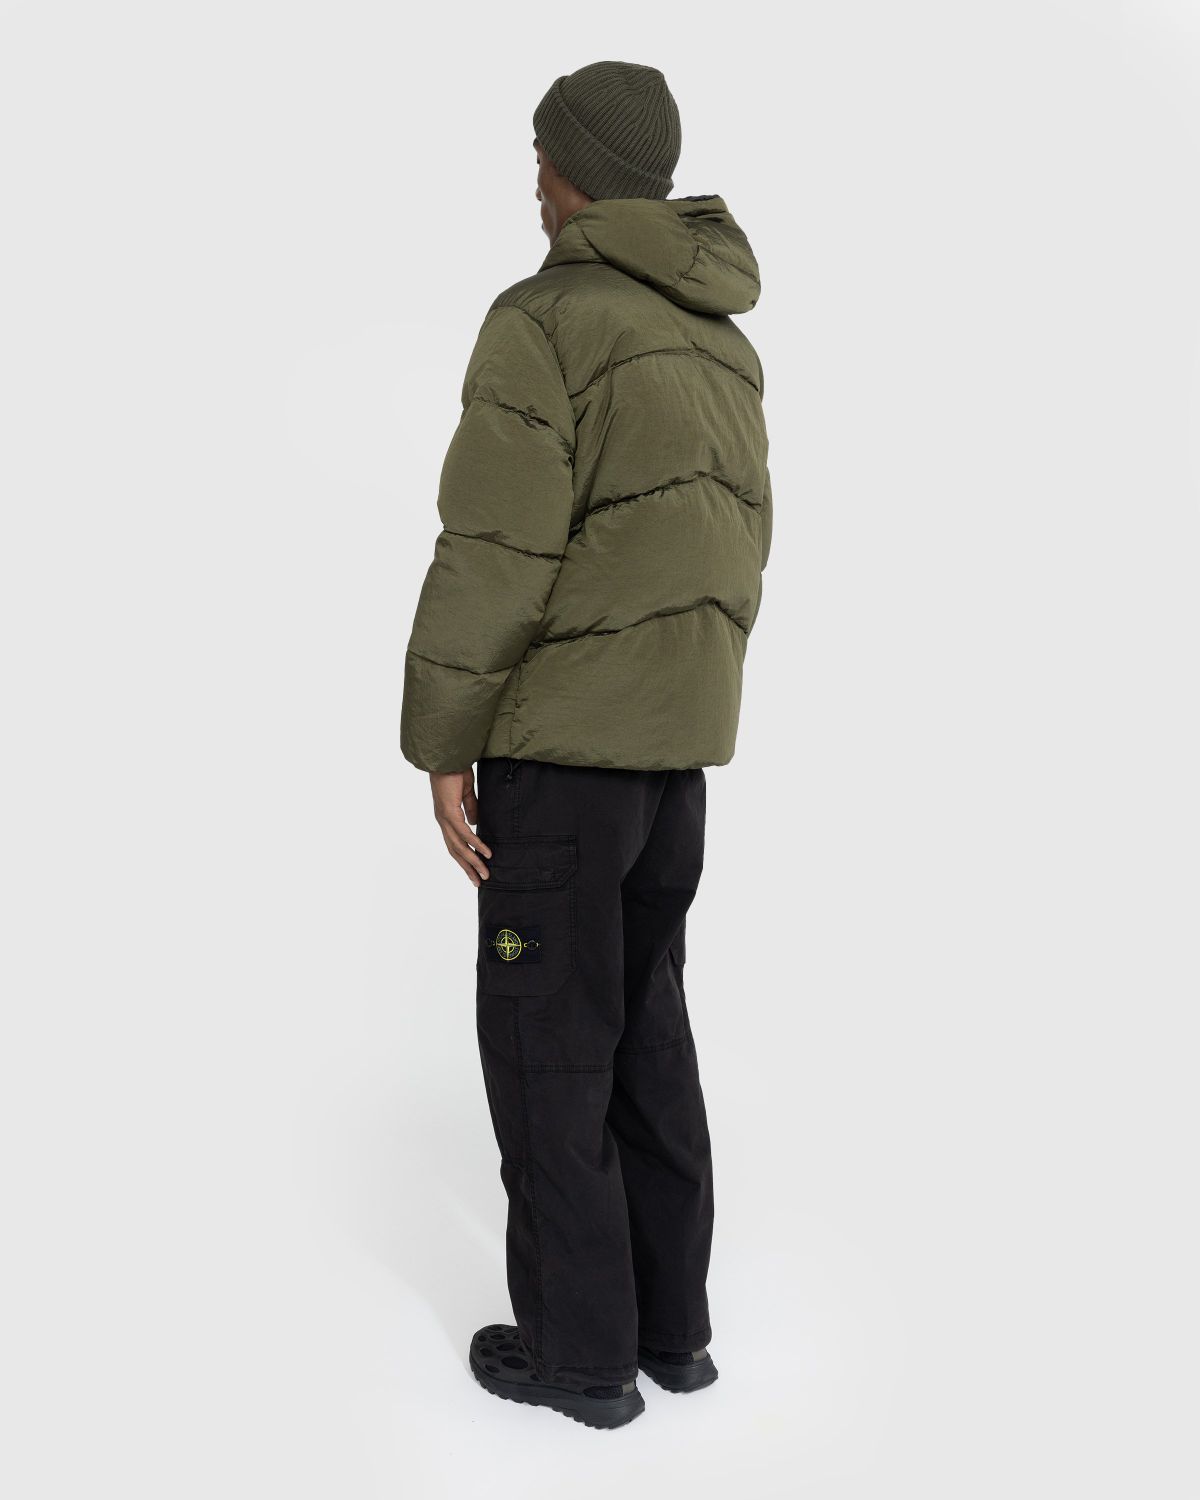 Stone Island – Down Puffer Jacket Olive - Outerwear - Green - Image 3